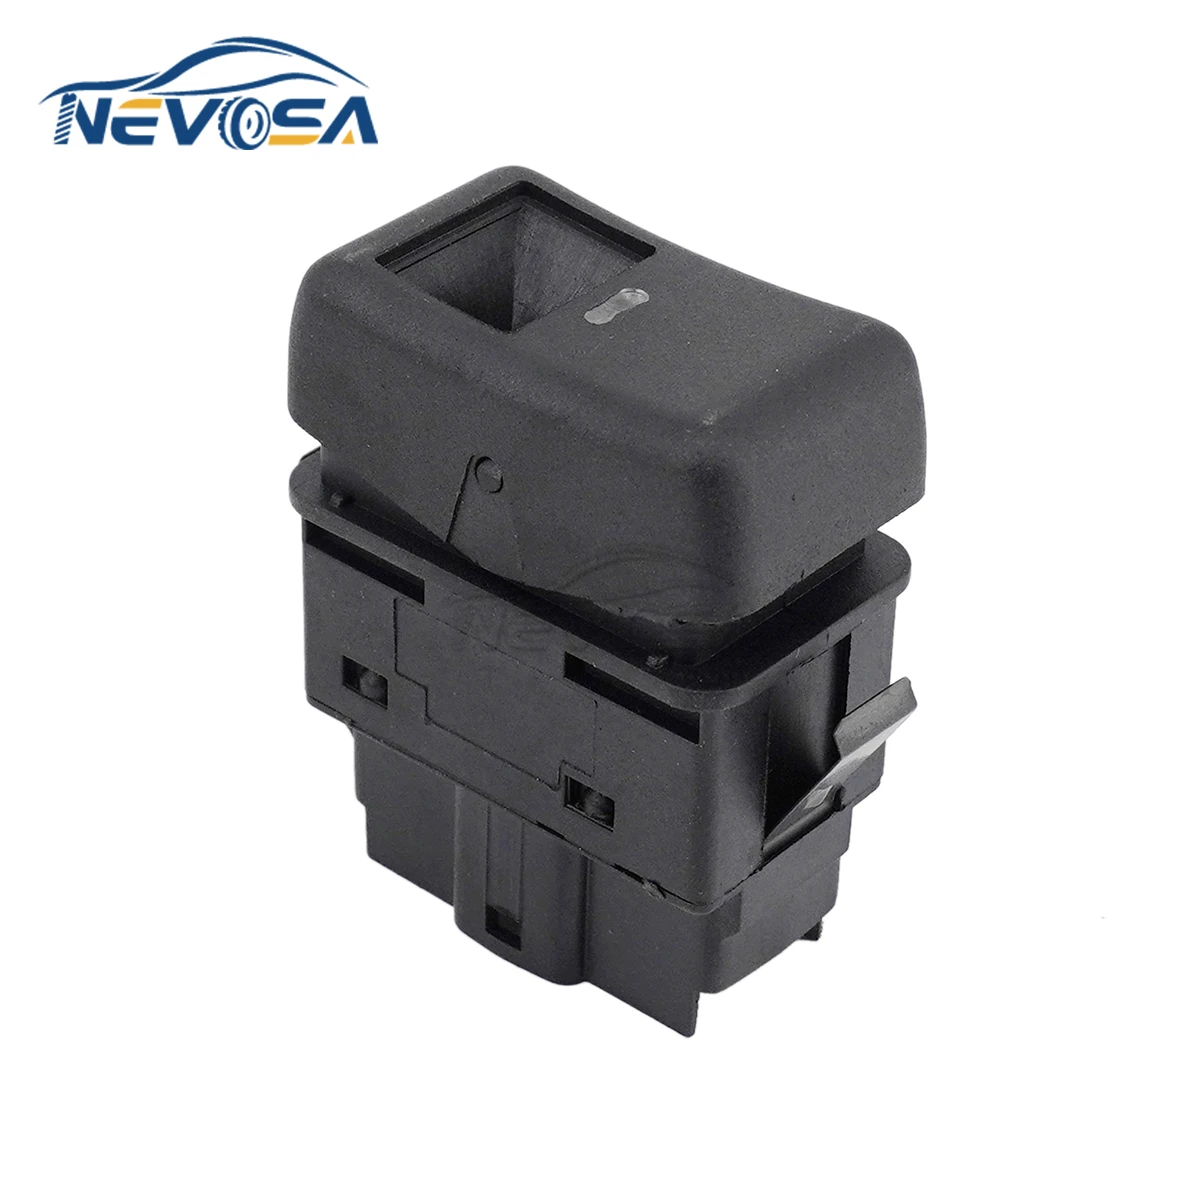 NEVOSA DT 2.25303 Switch Replacement For VOLVO FH12 FH16 Truck 20569988 20569992 3197757 Car Parts Replacement